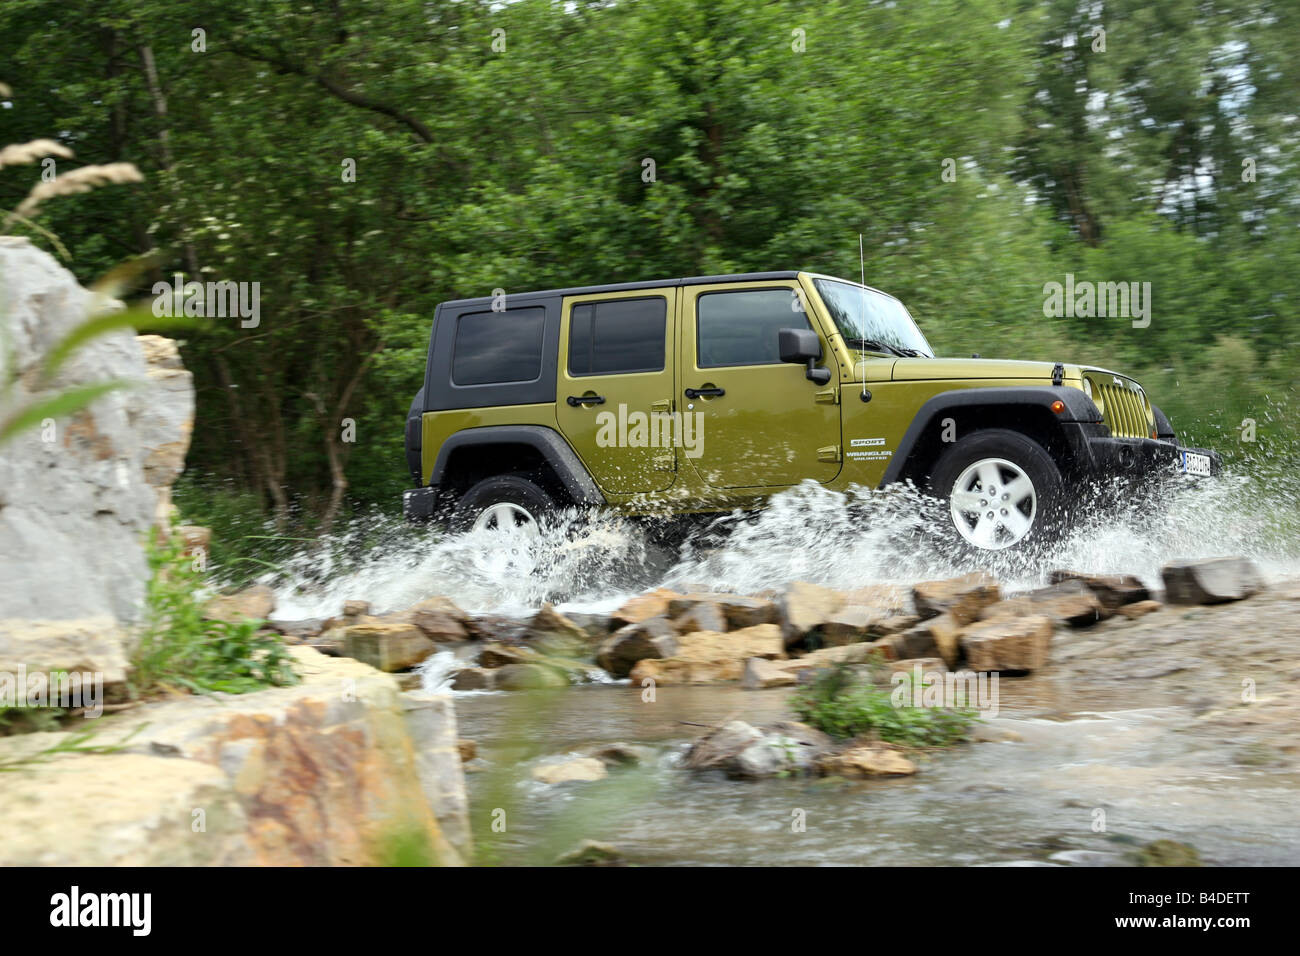 Jeep Wrangler Unlimited 2.8 CRD, model year 2007-, green-metallic, driving, side view, offroad, Water Stock Photo